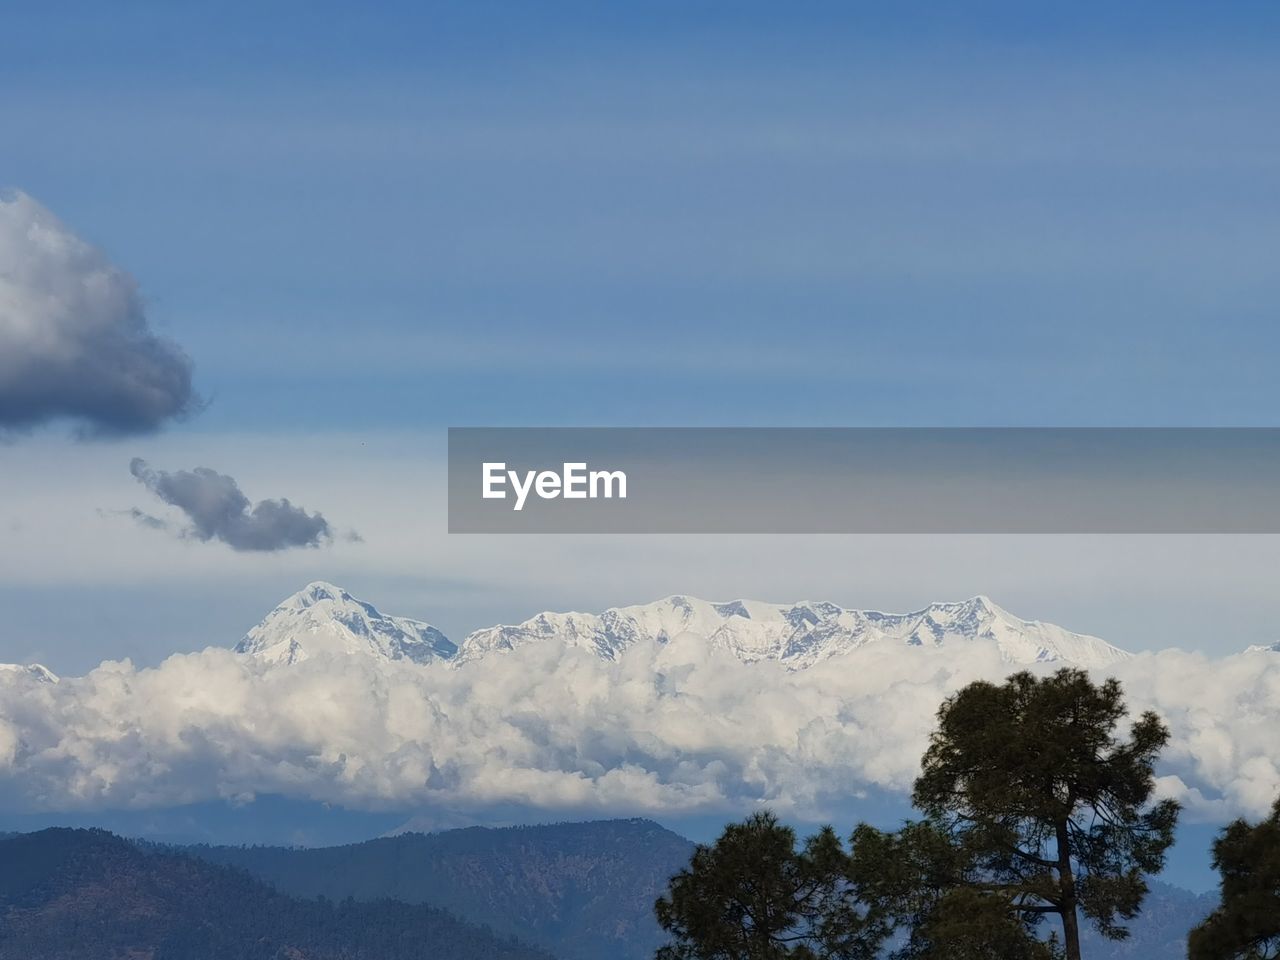 The greater himalayas including different peaks kedarnath, nanda devi and trishul peaks can be seen